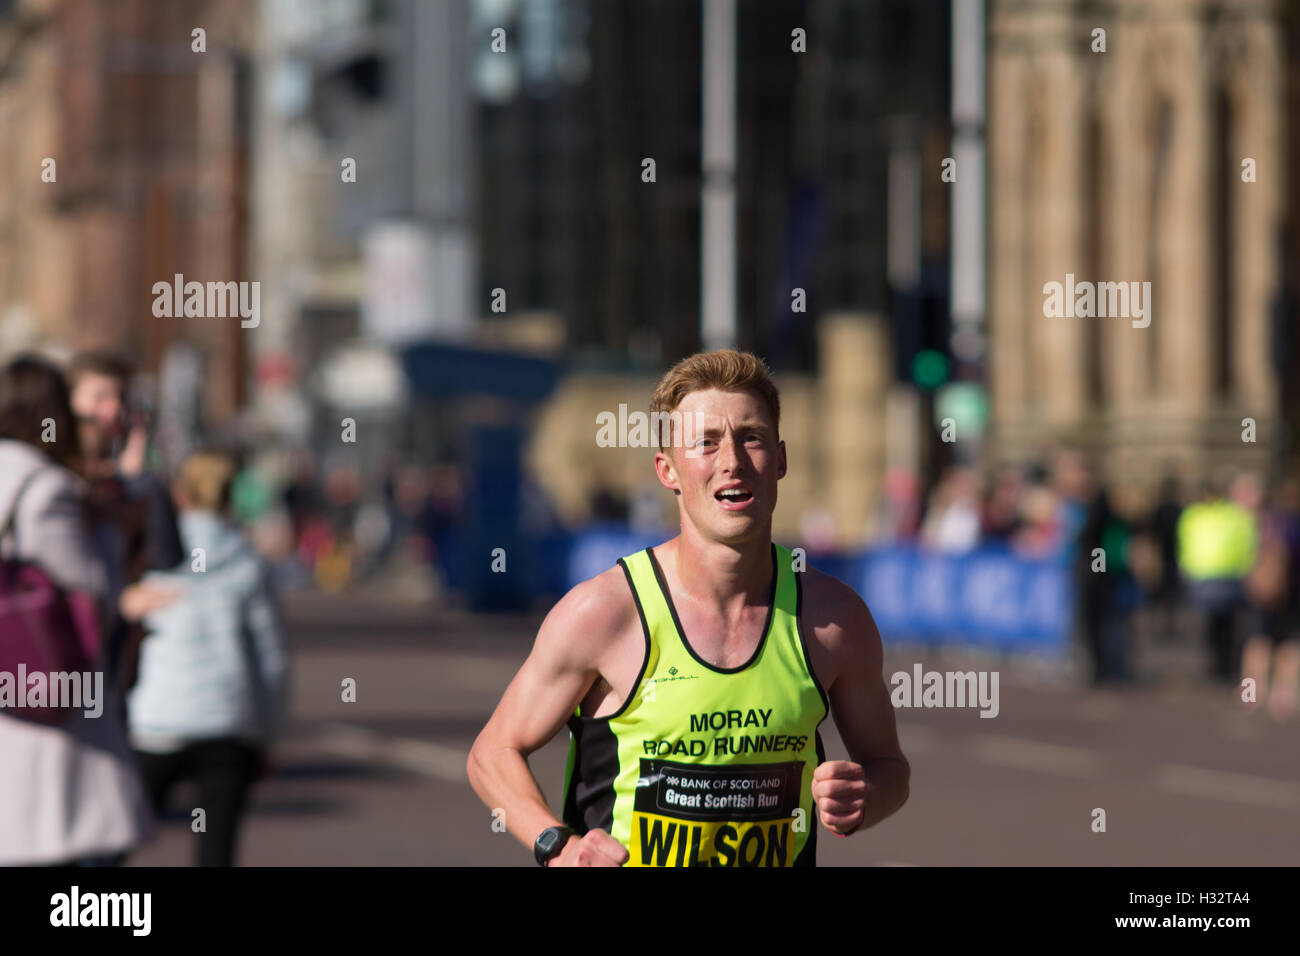 Runners on 10k and half Marathon during Great Scottish run in Glasgow city centre in Scotland. Stock Photo